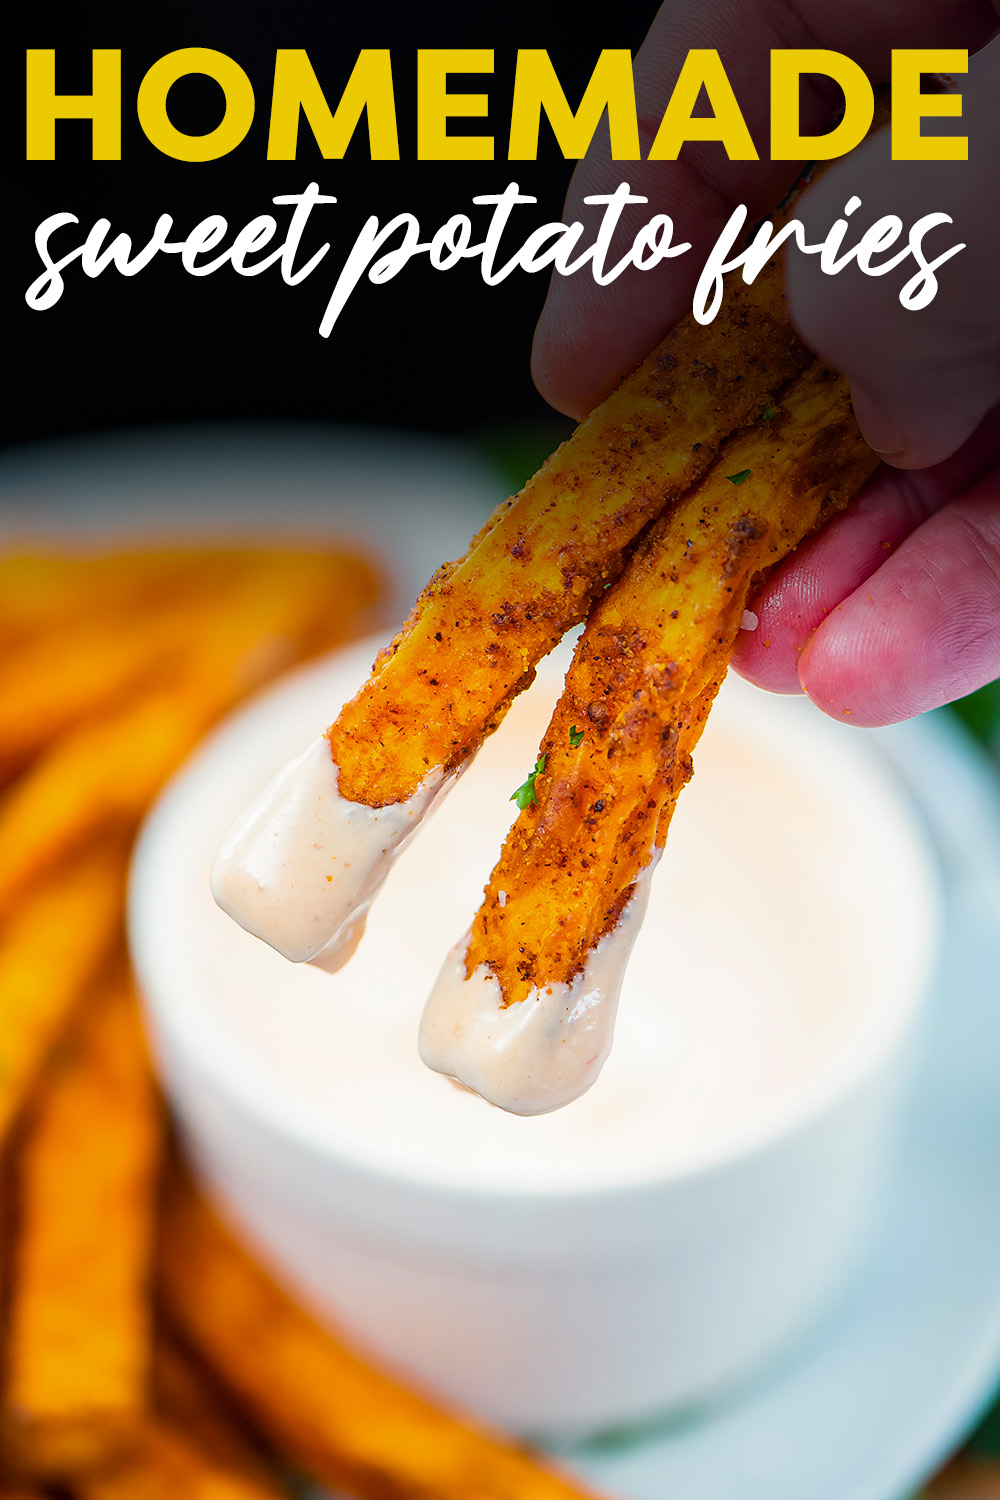 Making sweet potato fries in the air fryer couldn't be easier! Healthier than deep frying, quicker than baking, and they turn out delicious every time - especially with our special dip!